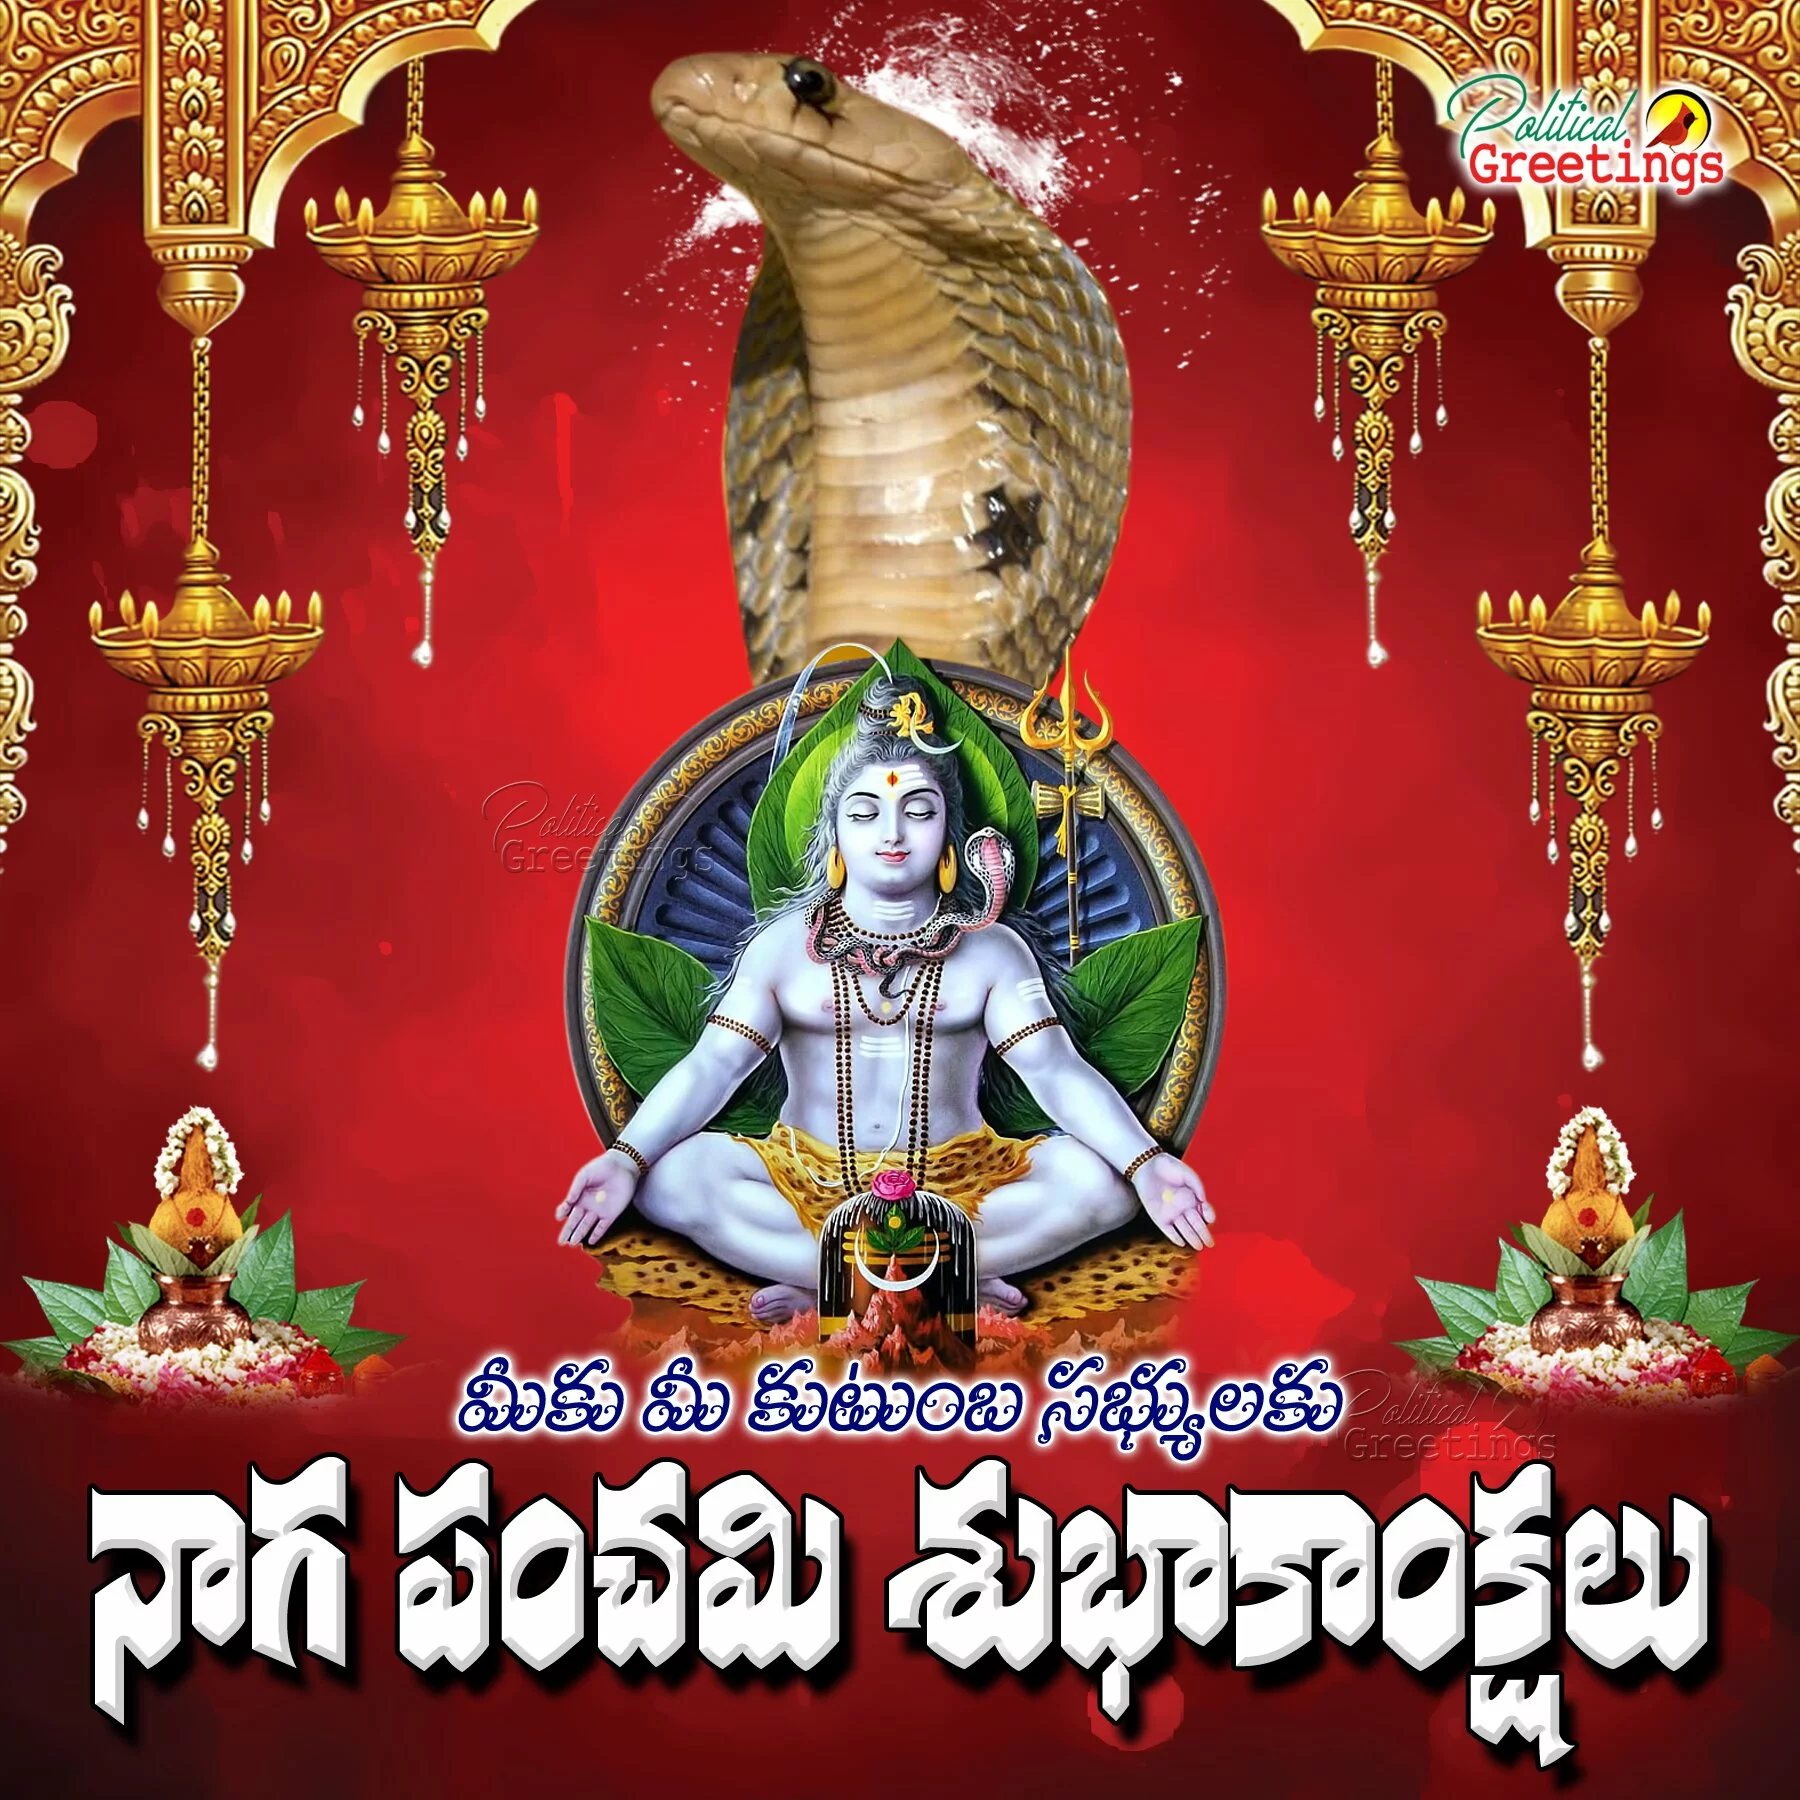 naga-panchami-telugu-quotes-wishes-greetings-photos-images-wallpapers-sms-messages